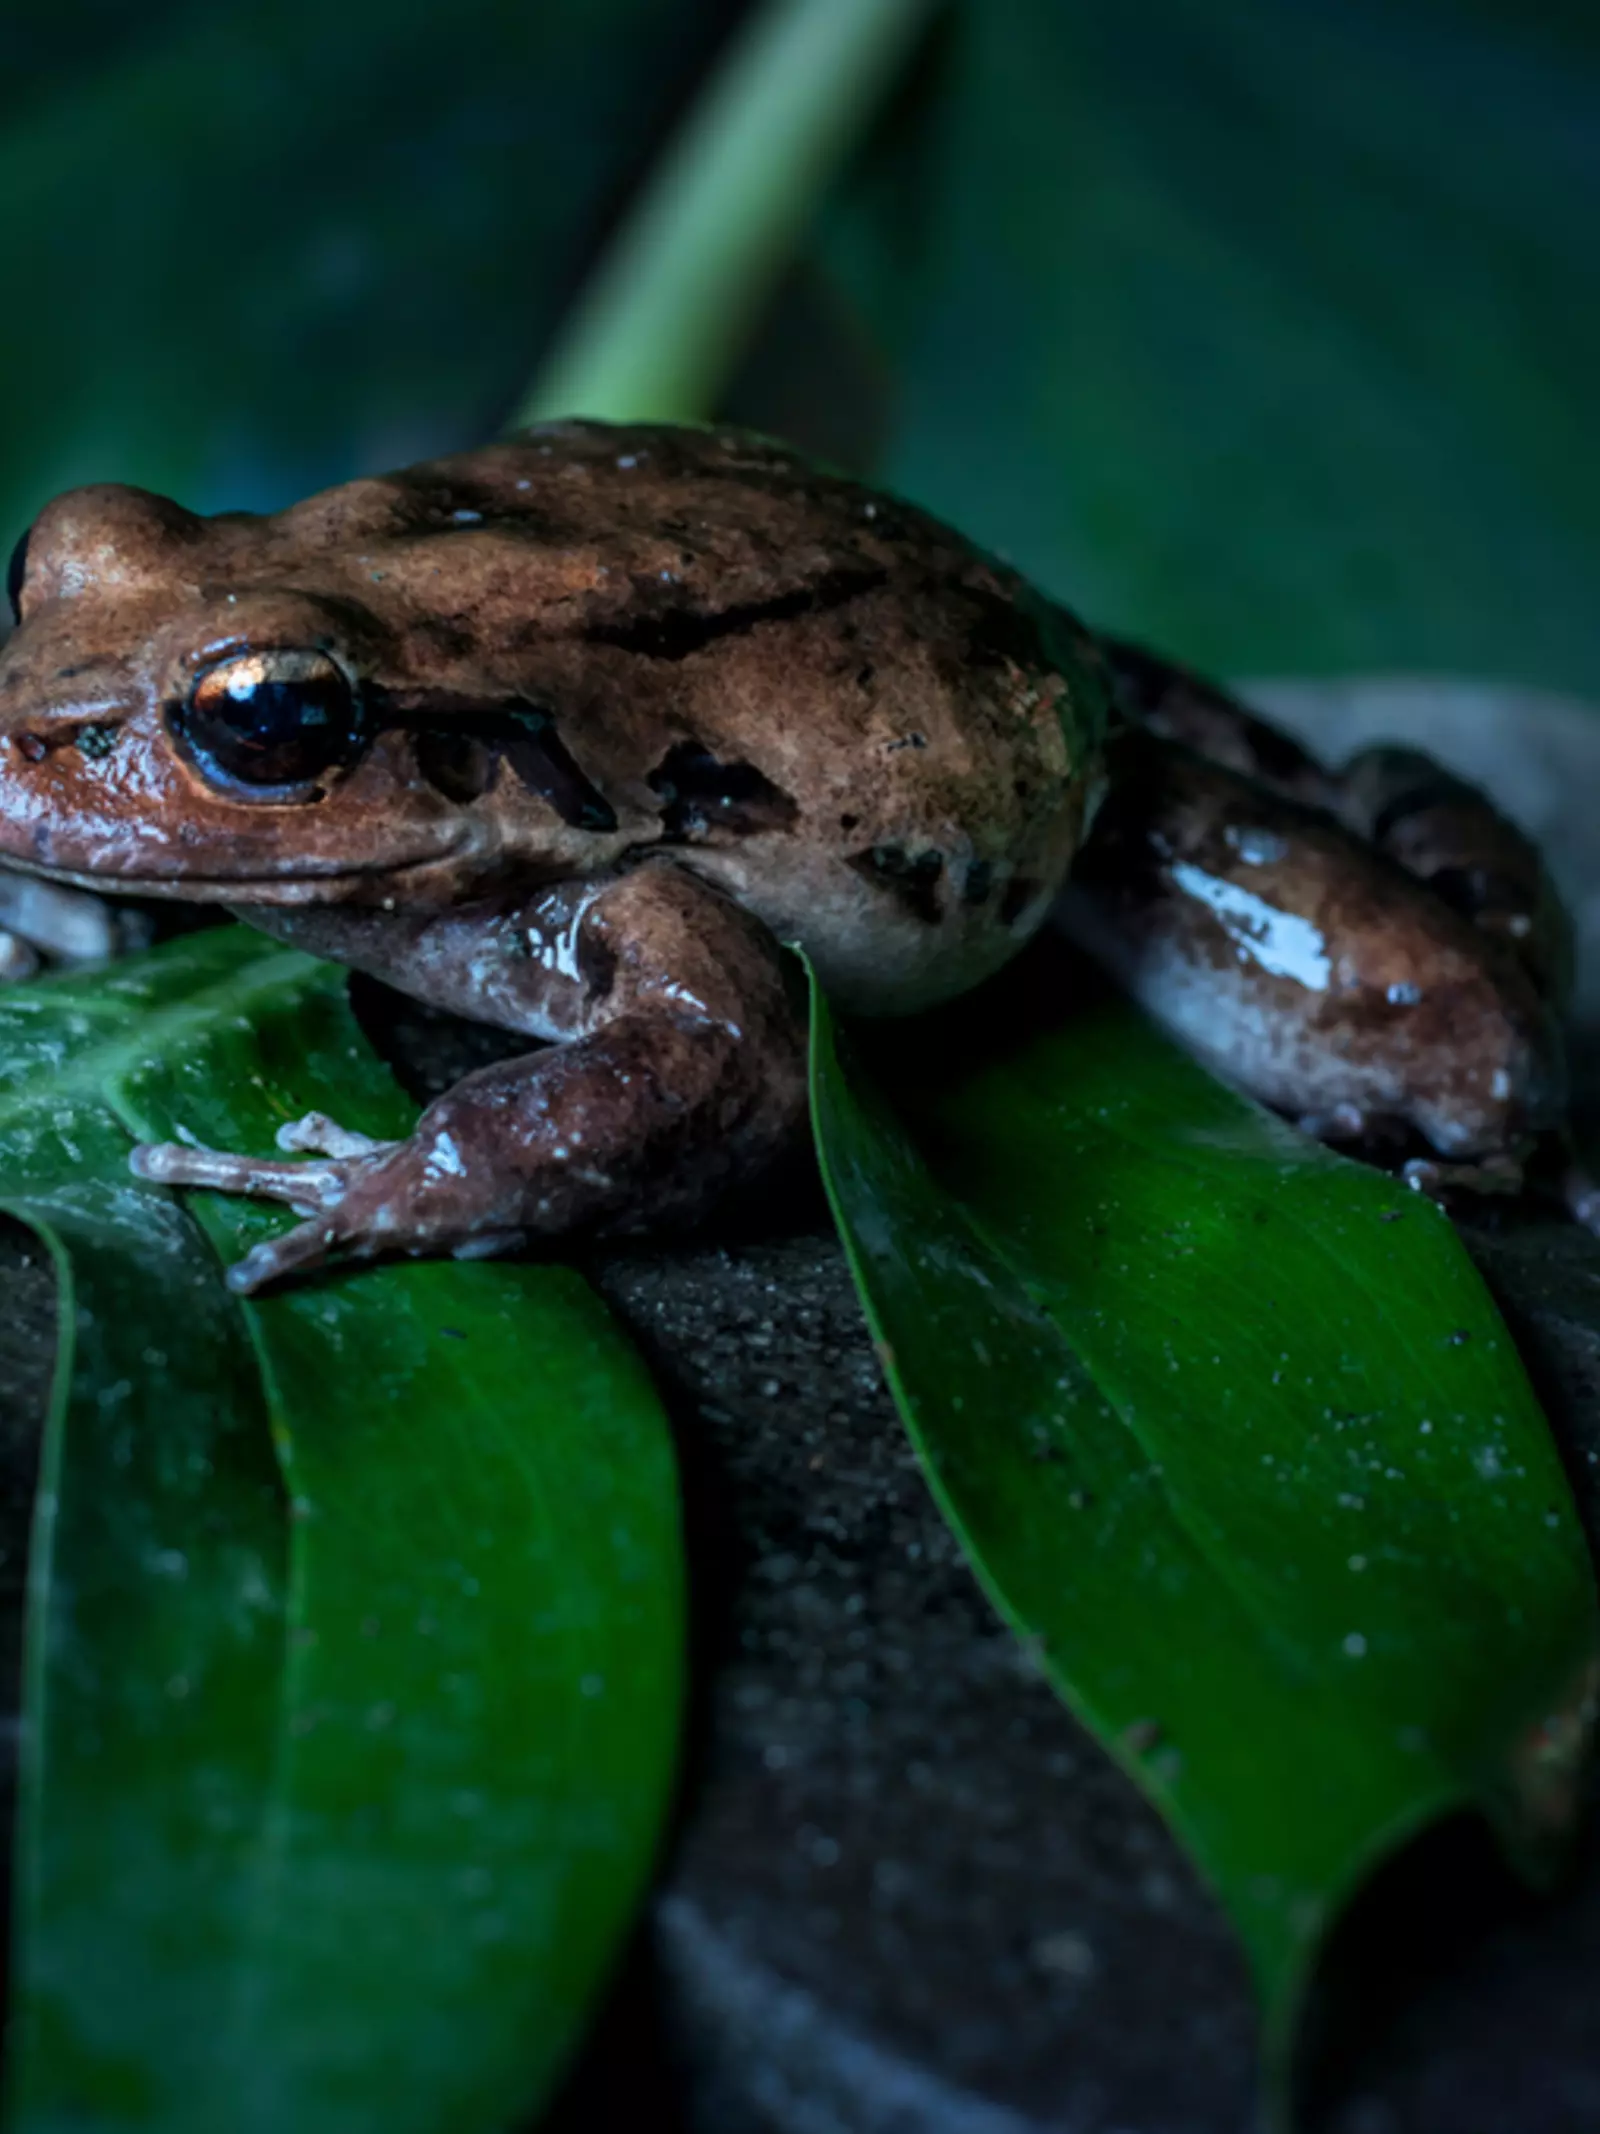 Mountain chicken frog sitting on leaves